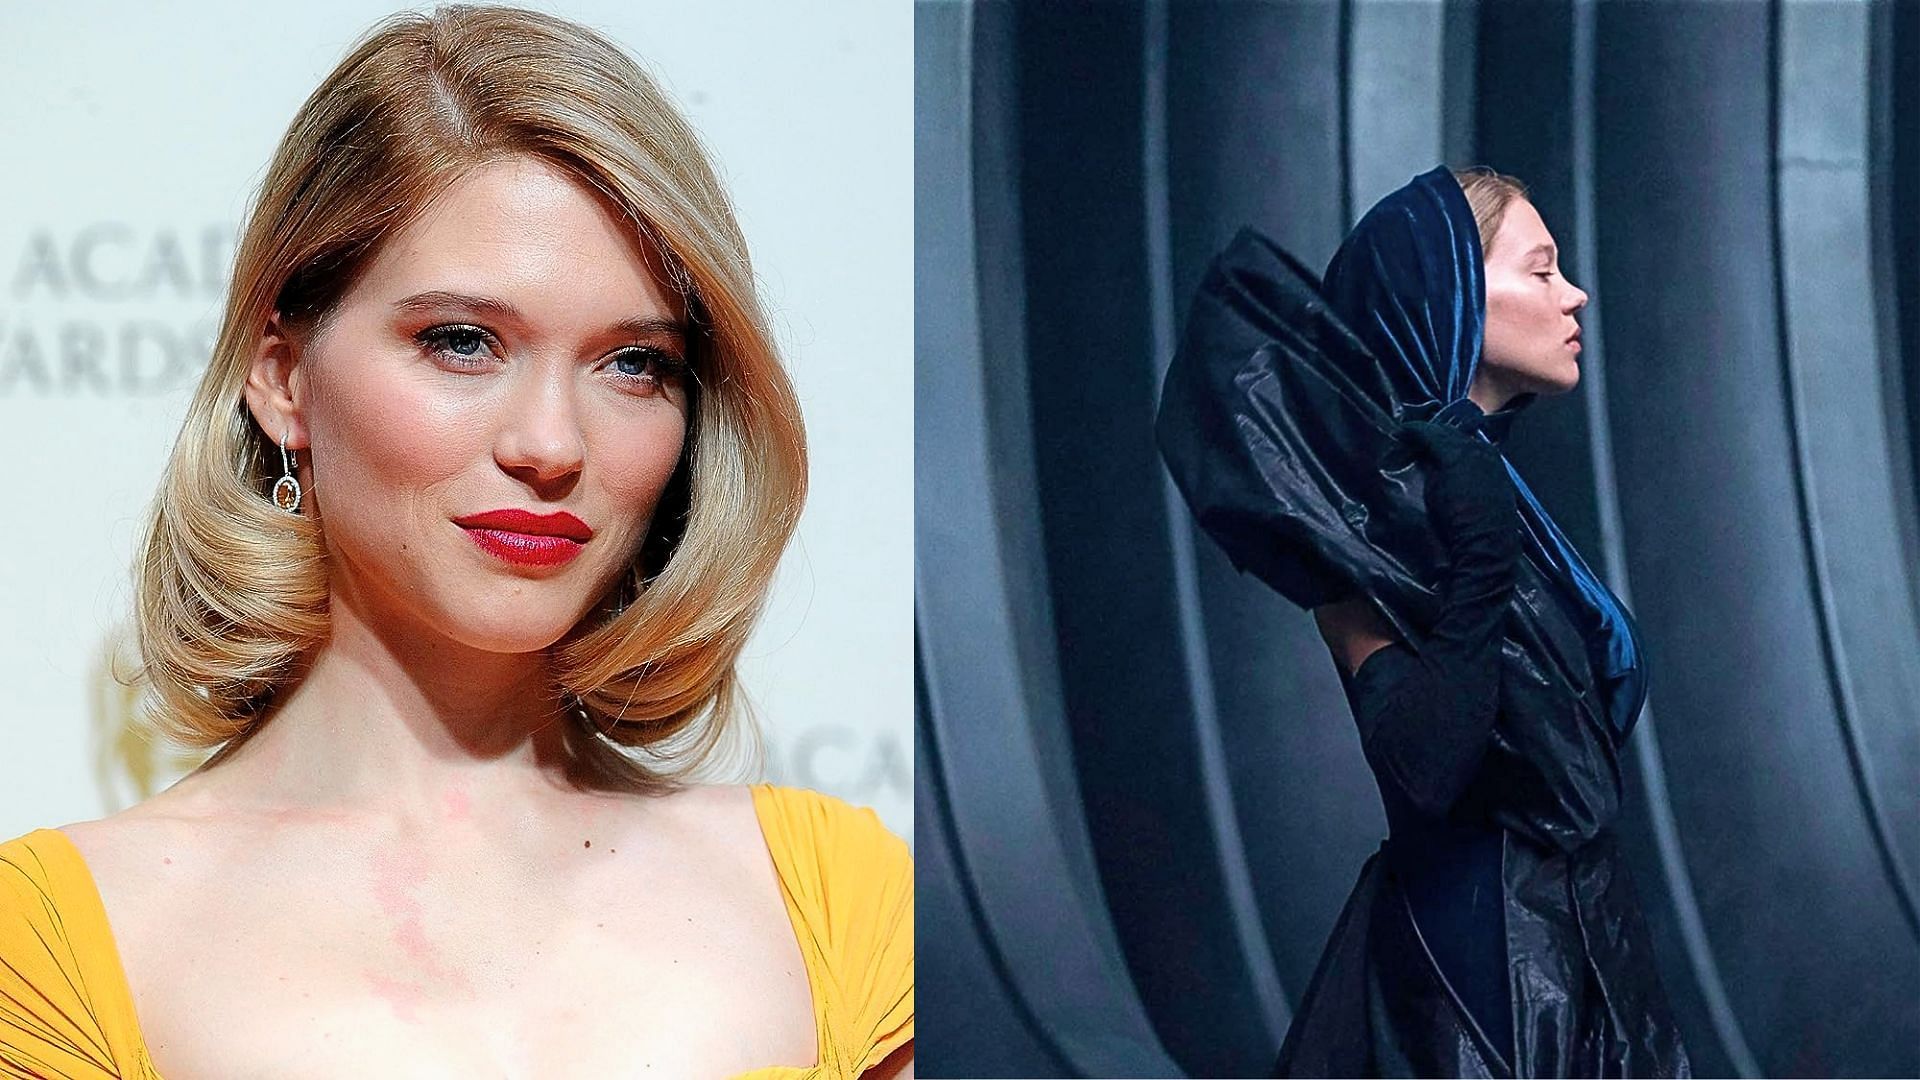 (L) L&eacute;a Seydoux plays (R) Lady Margot Fenring in Dune: Part Two (Images via IMDb and Niko Tavernise)